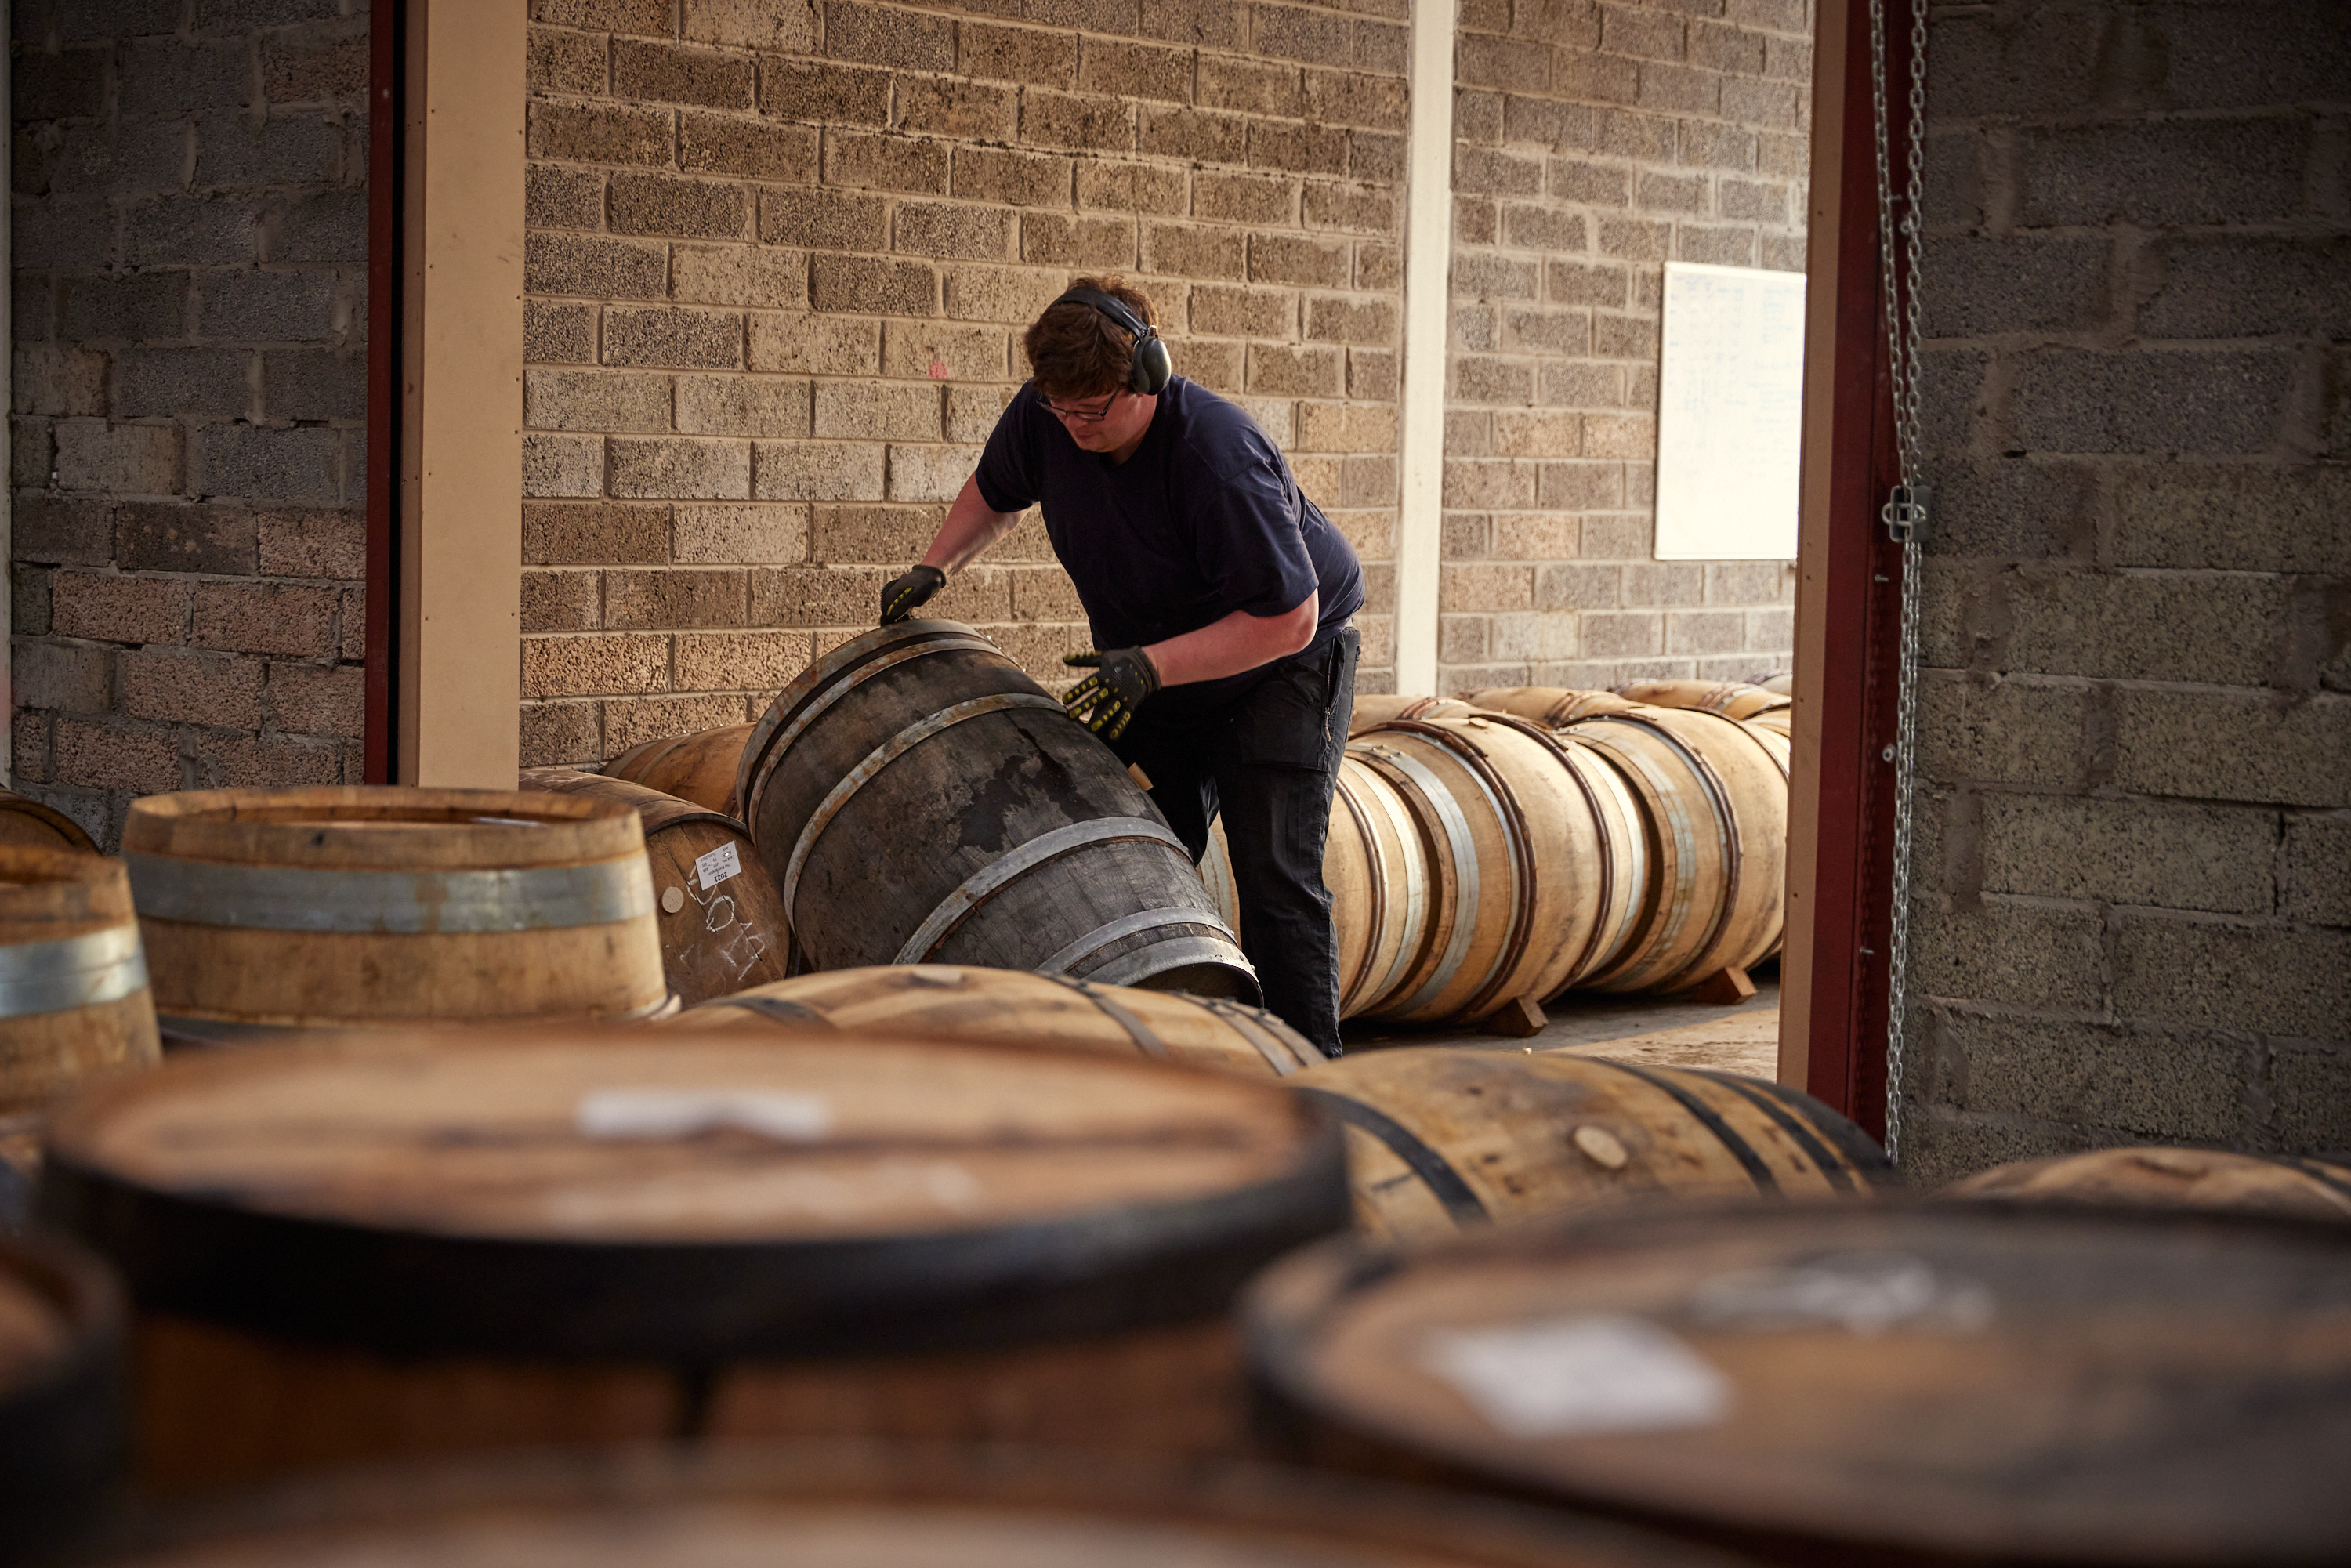 Bonnington distillery will run at a very small, personal level of production